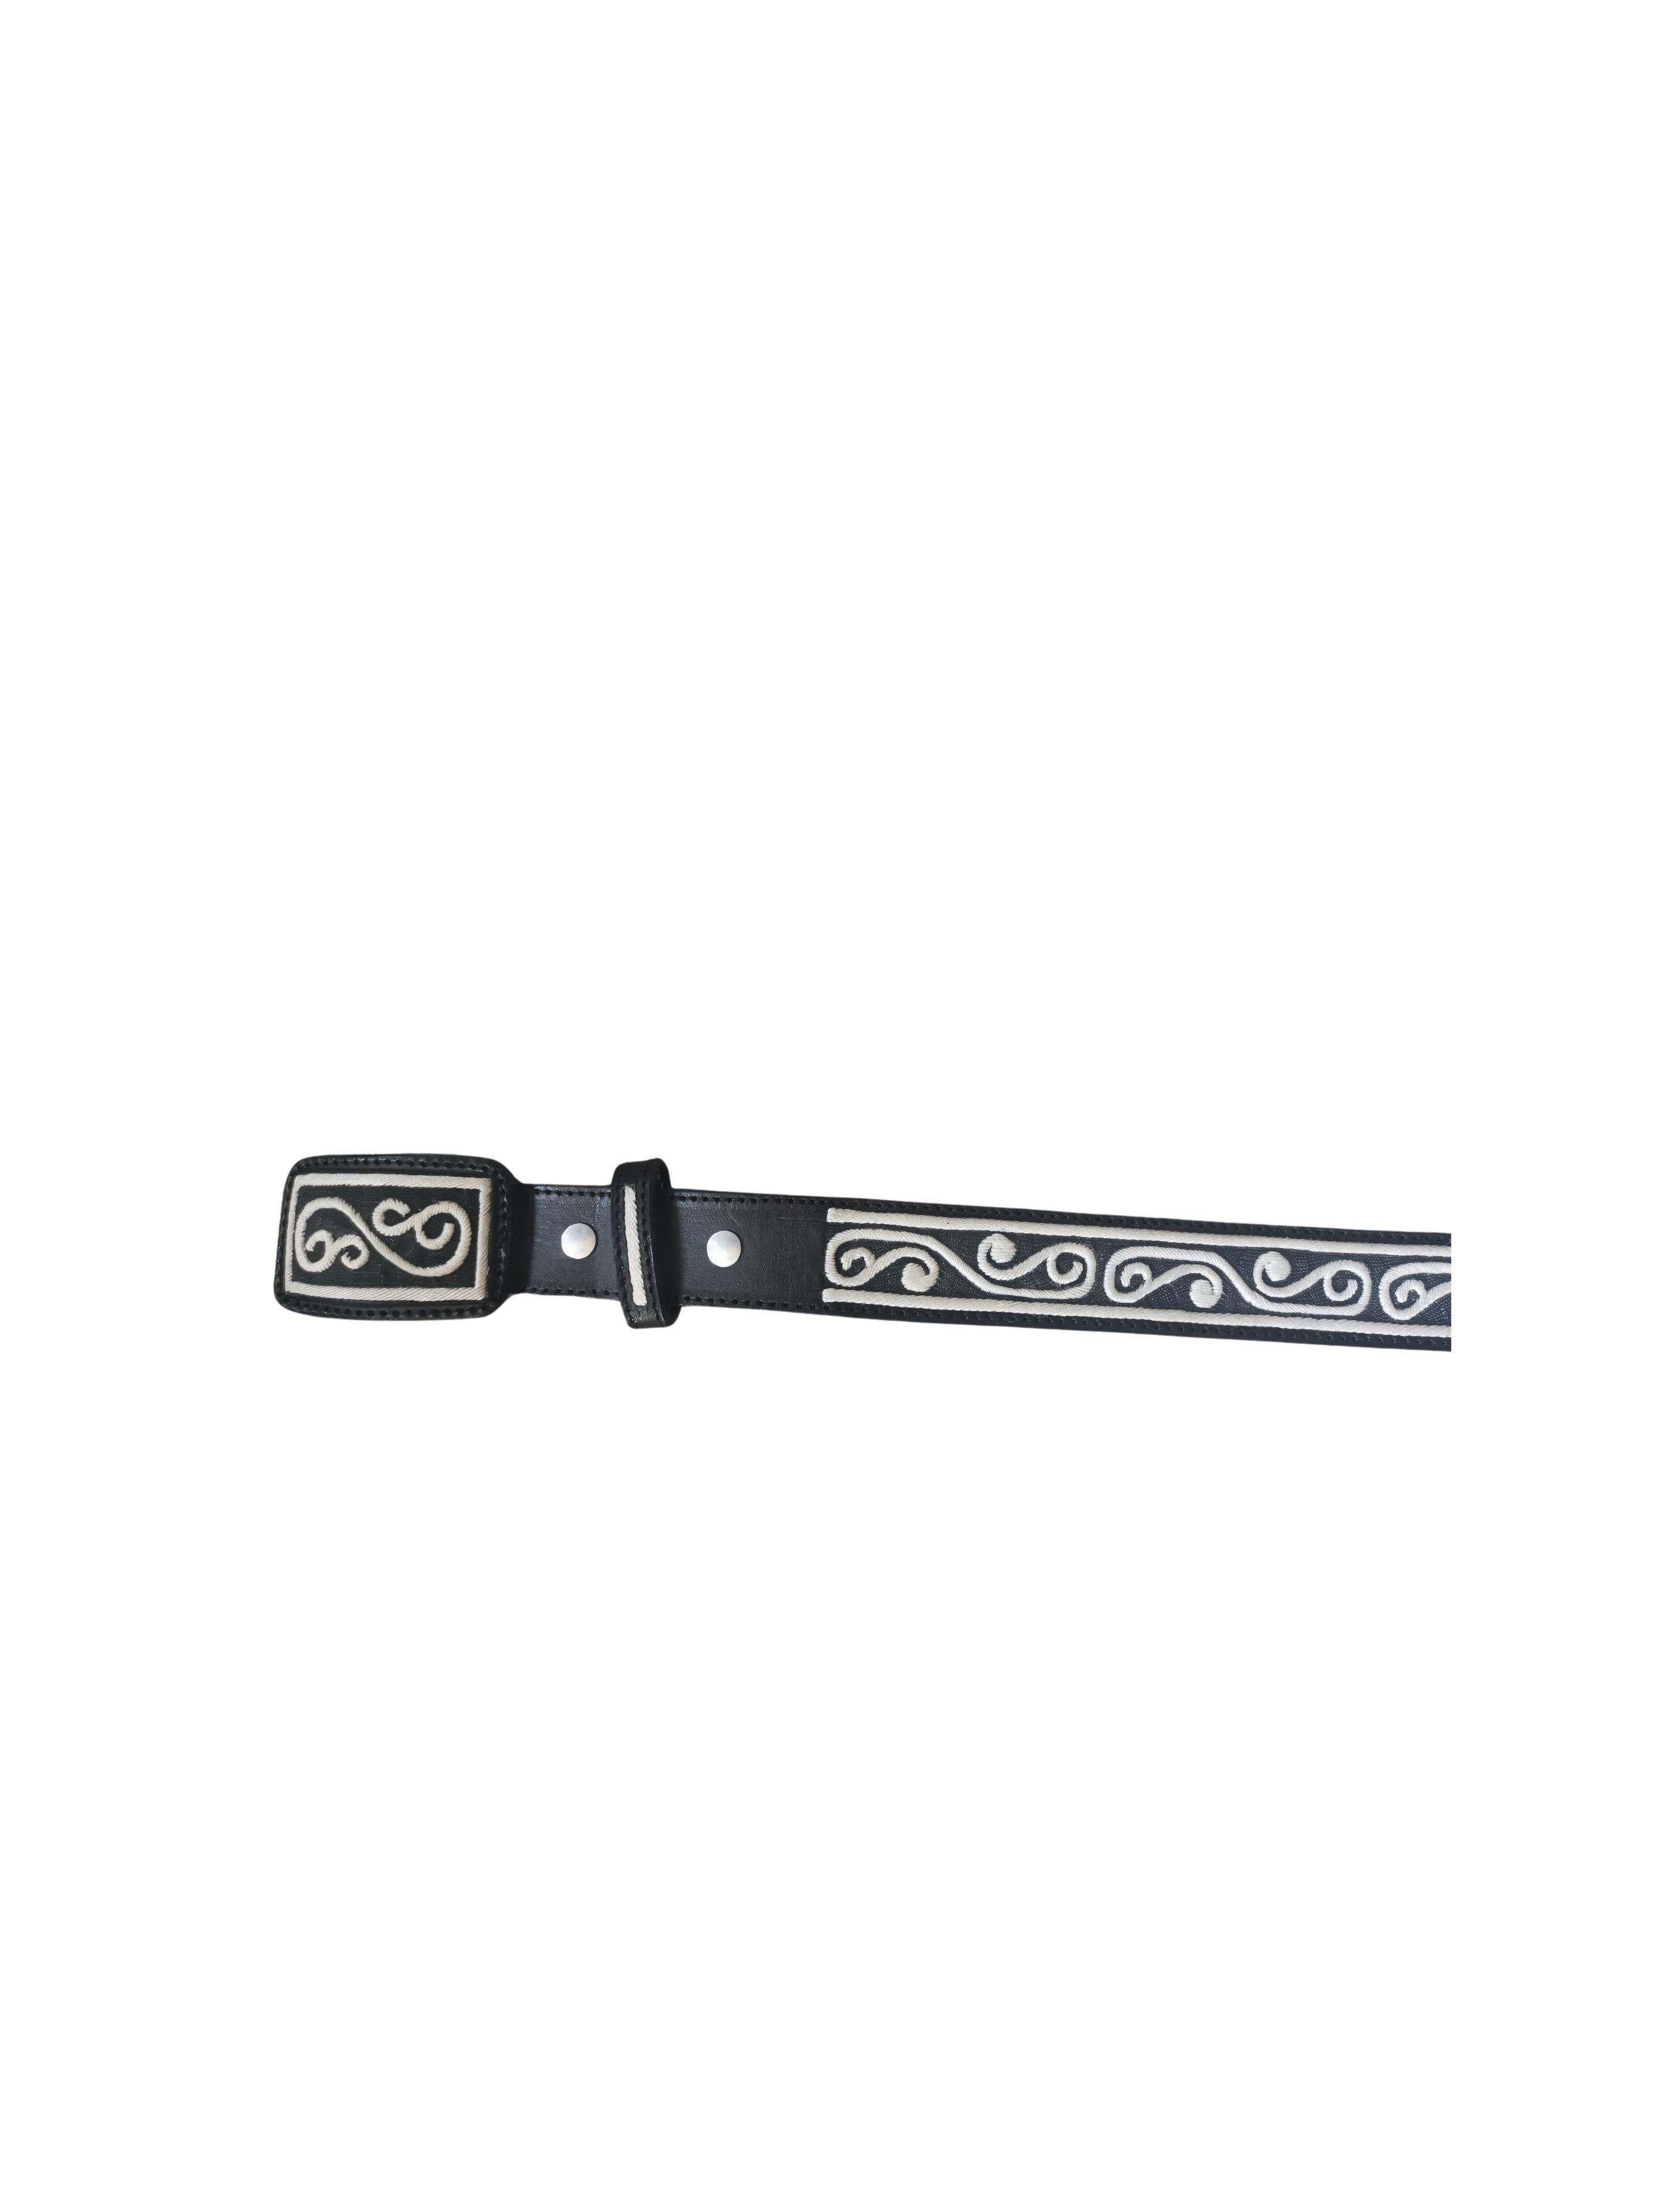 Mexican Traditional “Pita”  Belt and Buckle For Sale